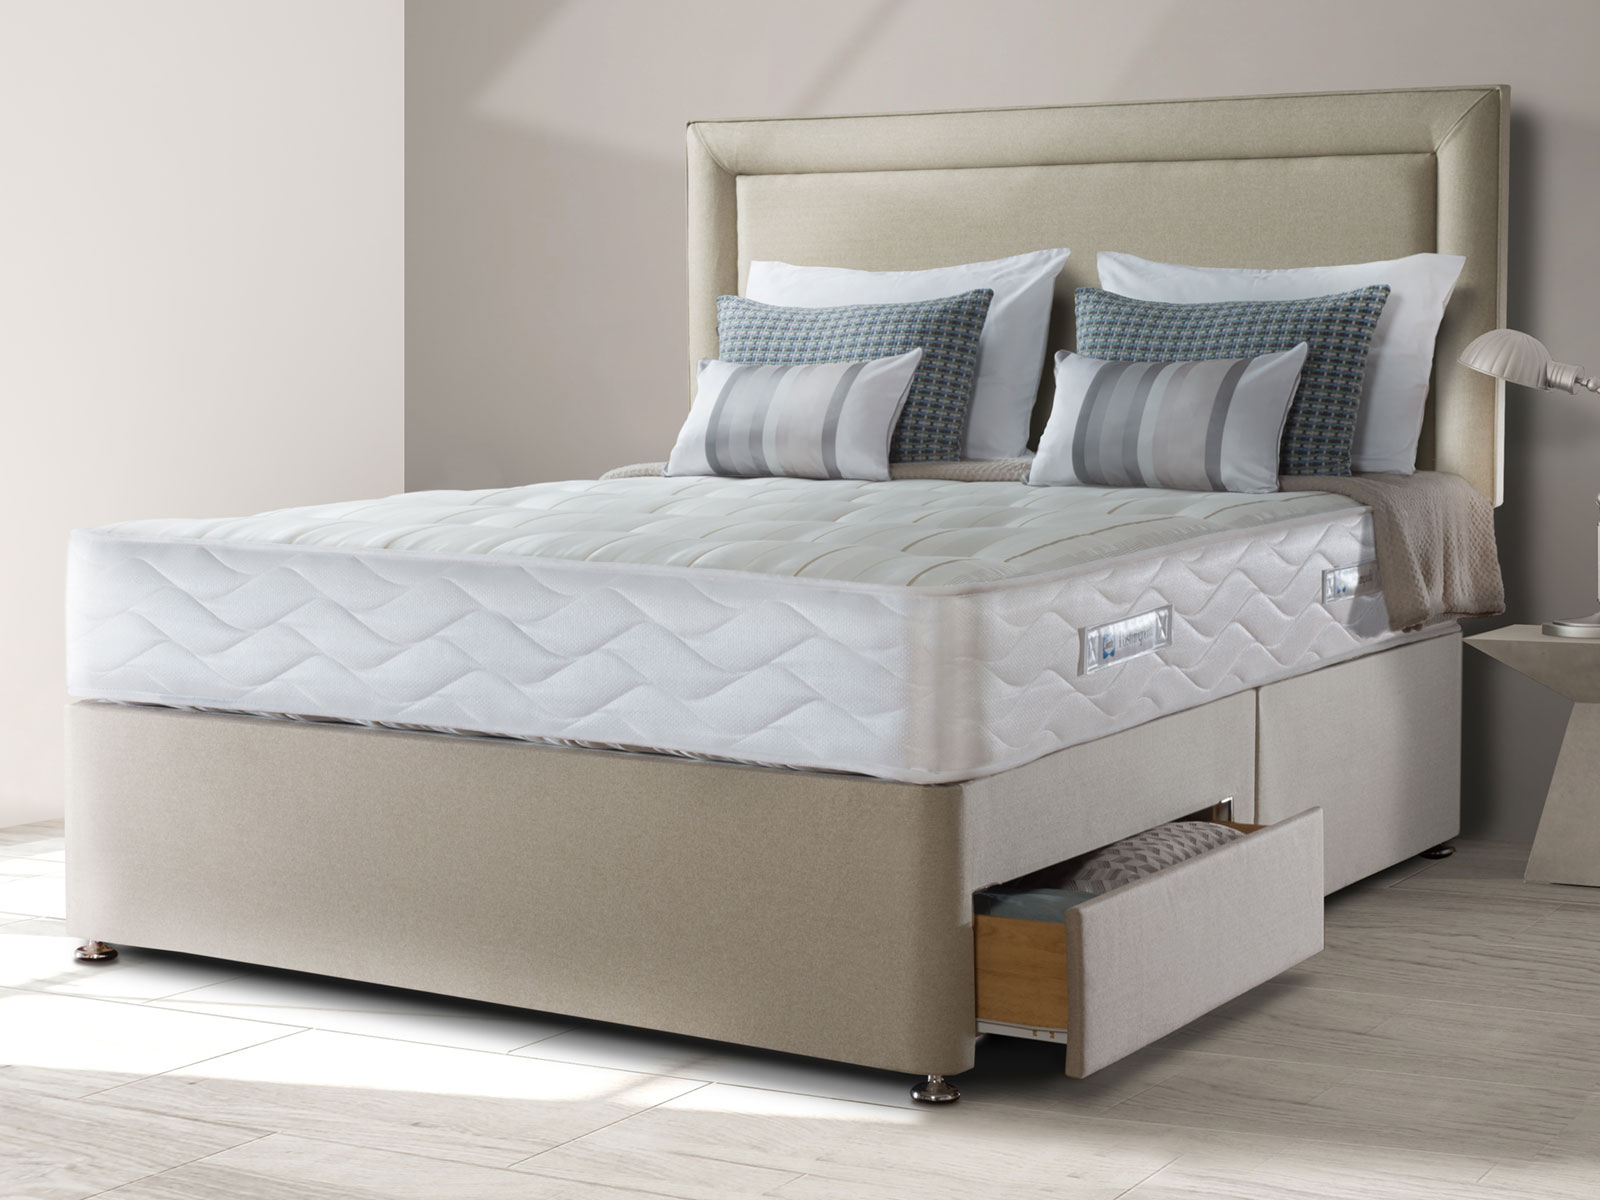 4ft6 Double Sealy Pearl Elite Mattress From The Sleep Shop